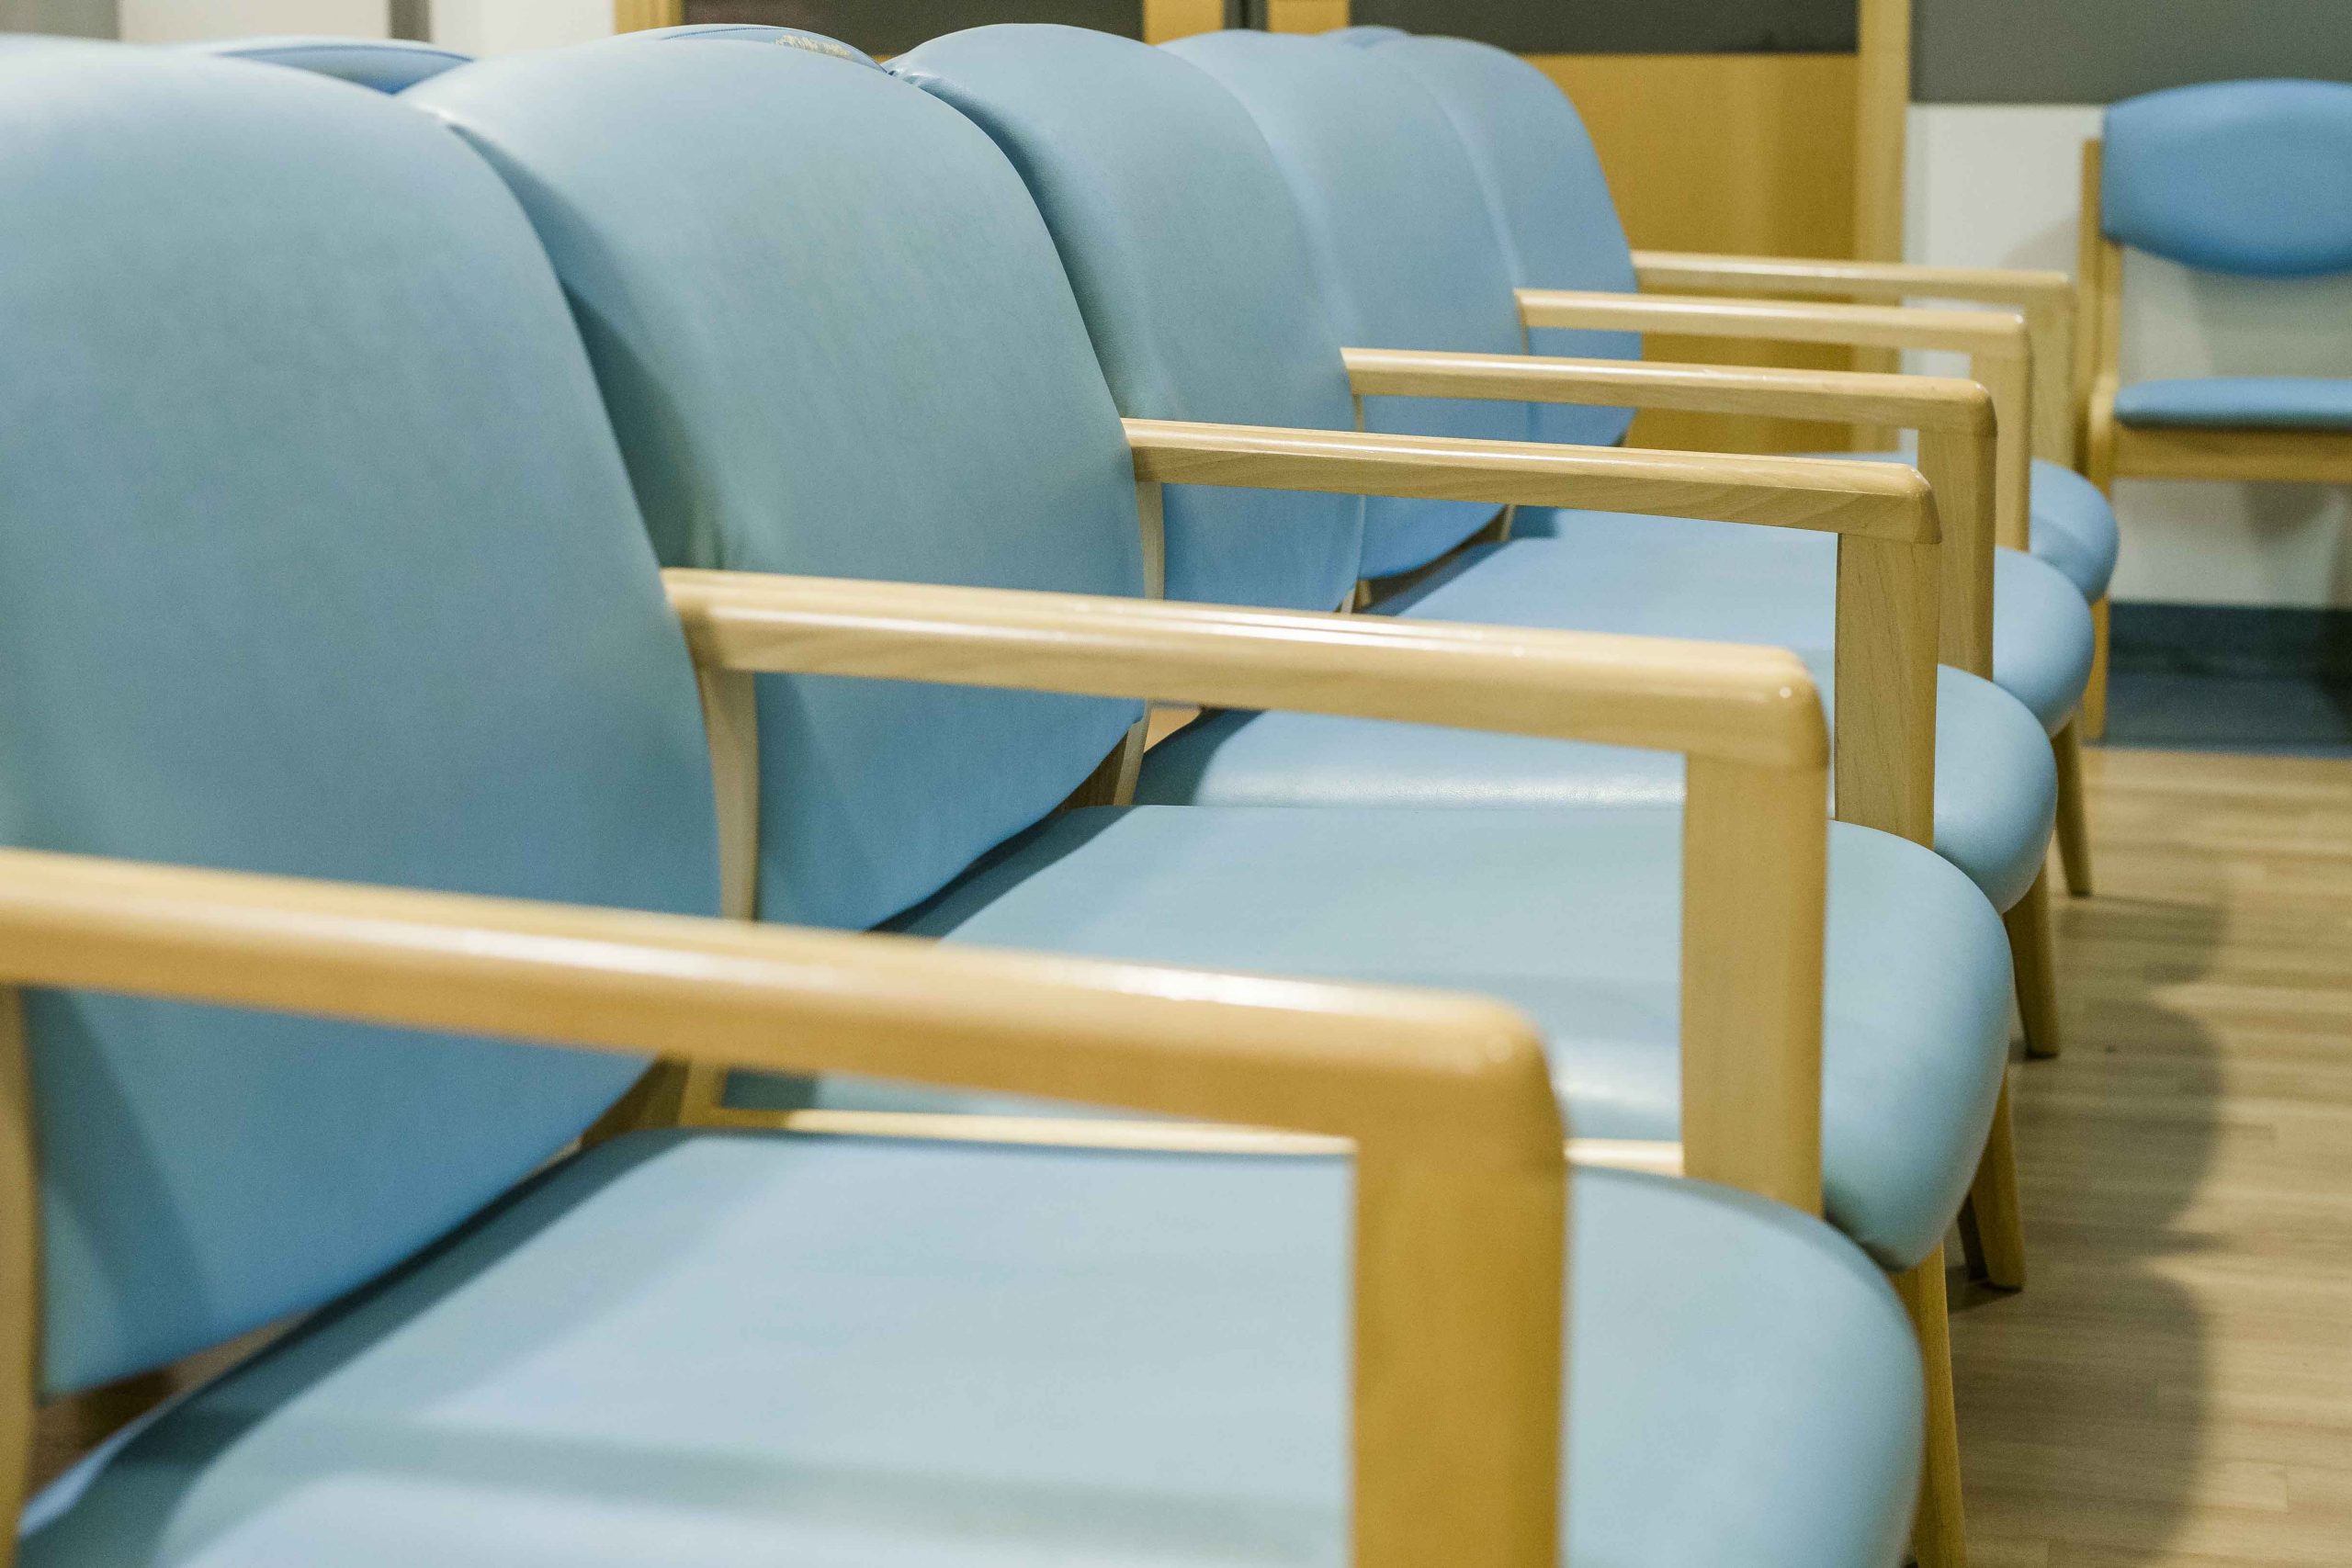 A row of chairs with wipeable blue green covers set in an eye clinic waiting room